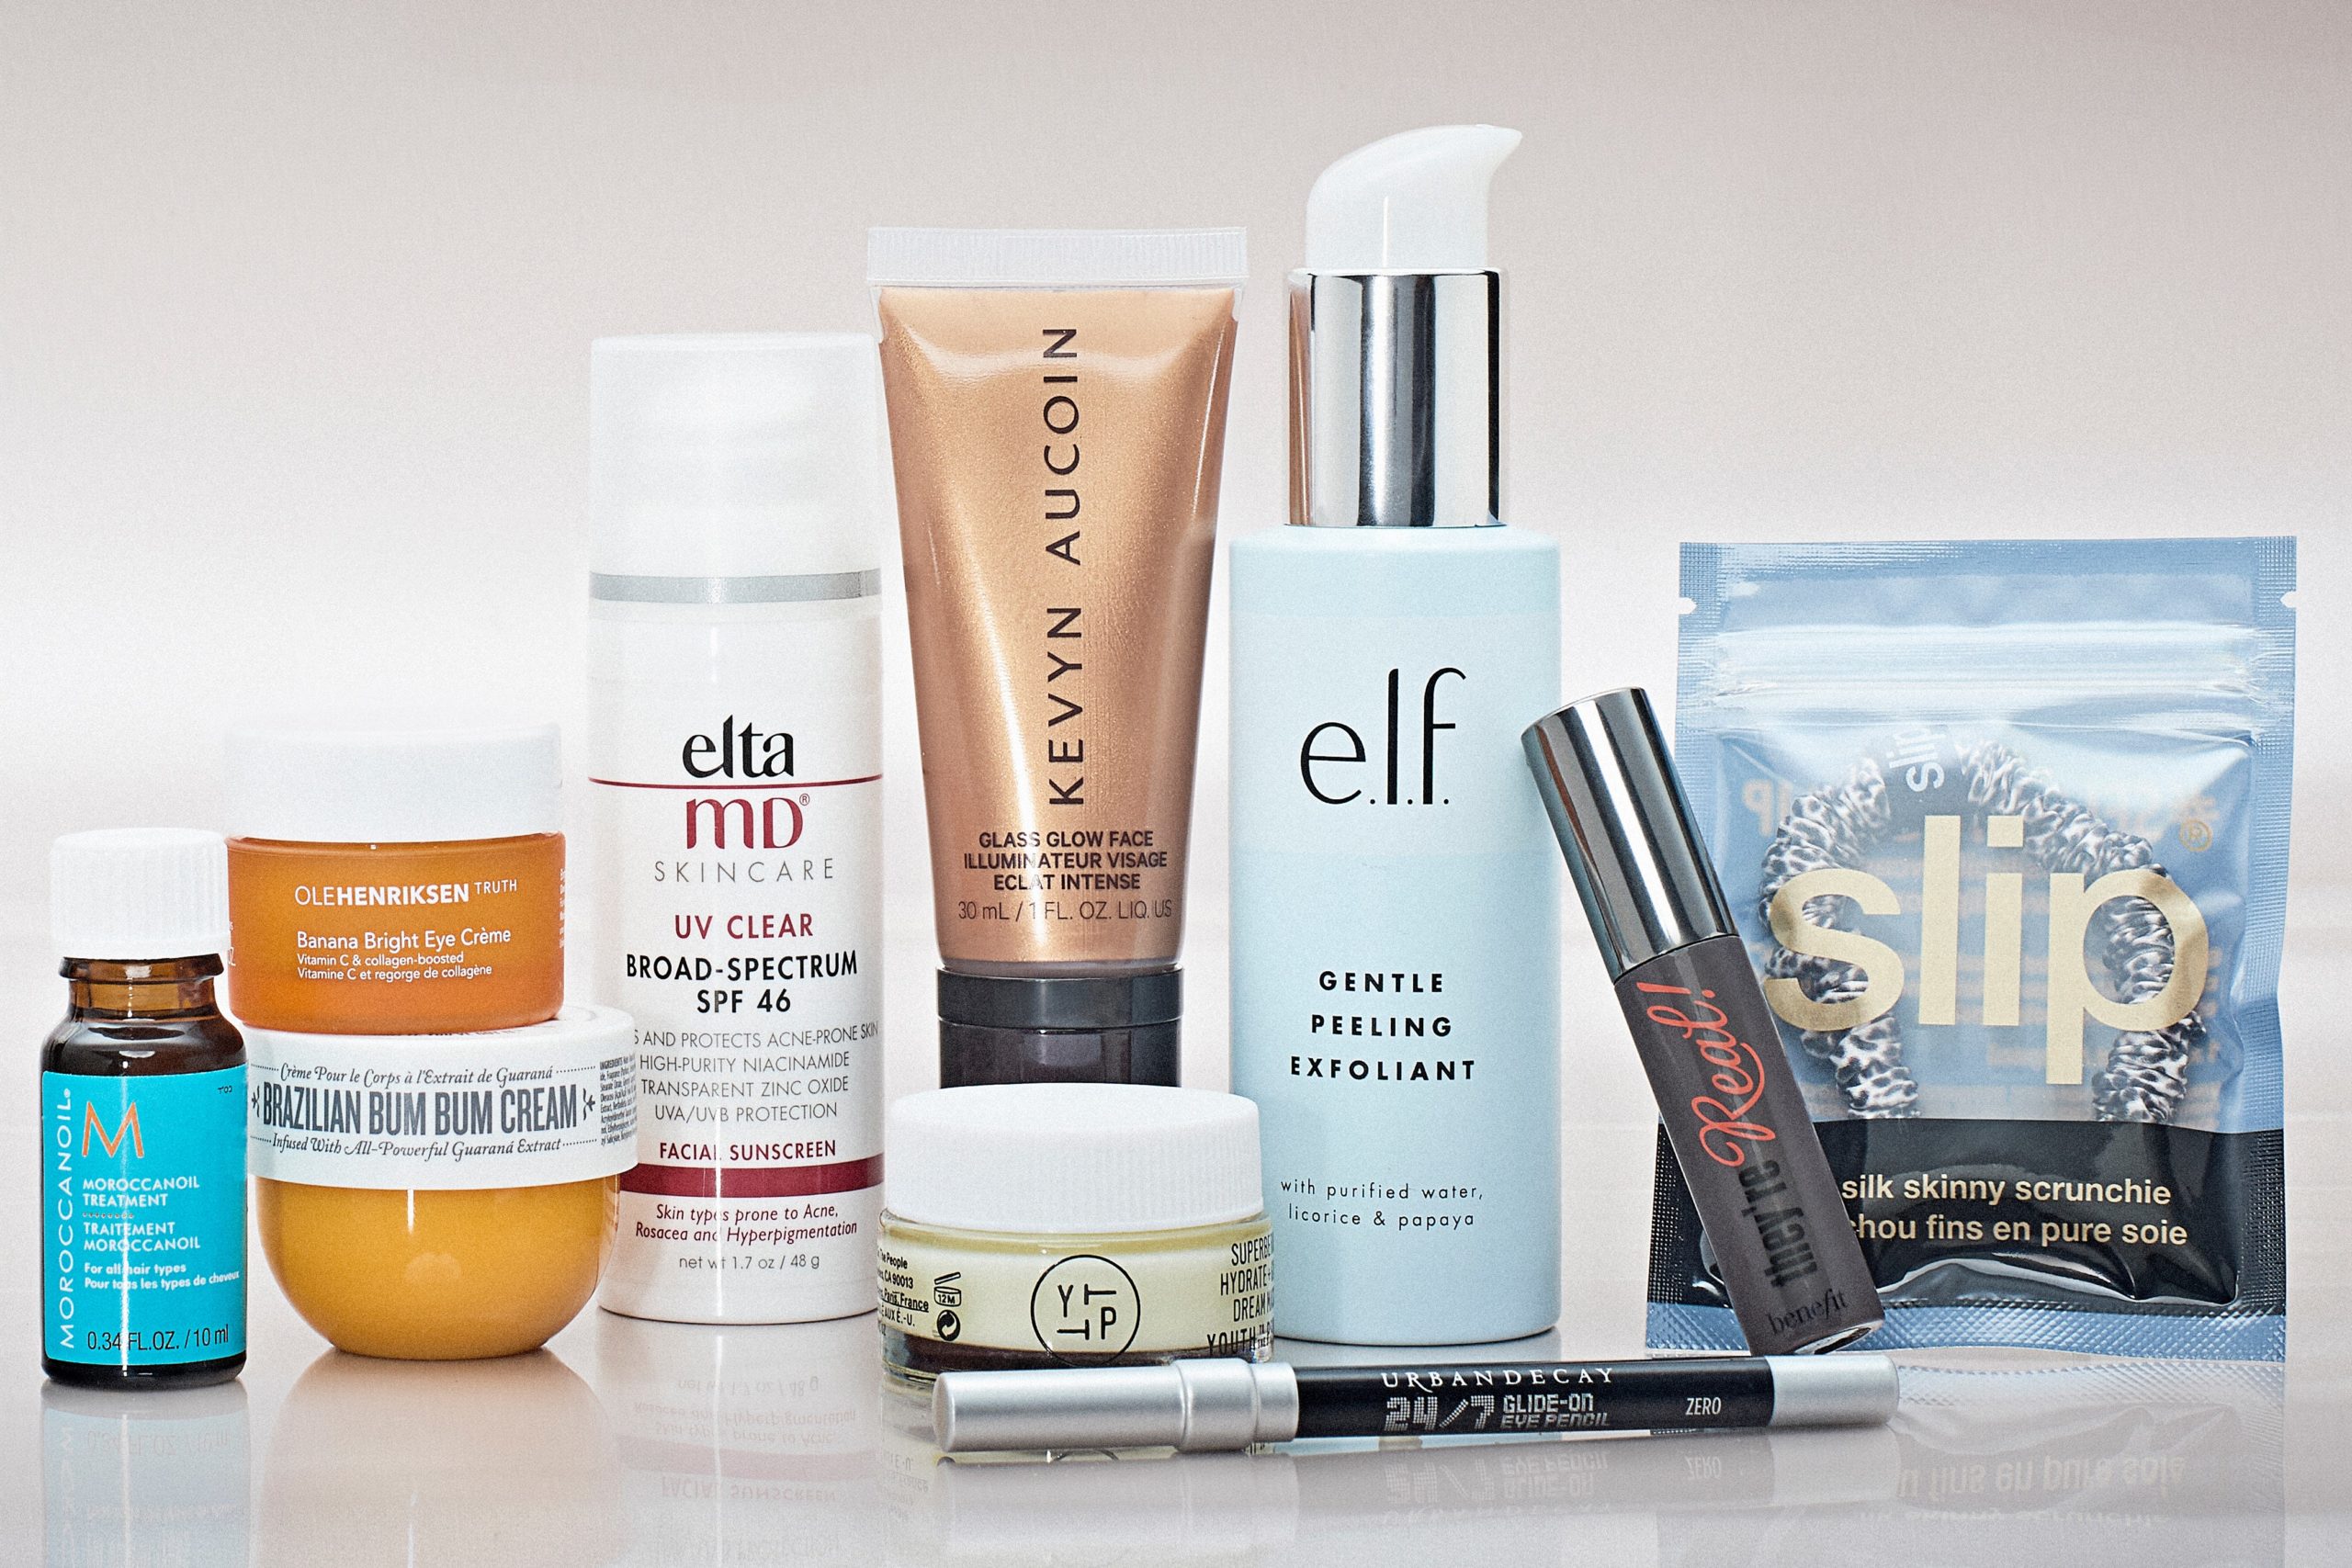 The Limited-Edition Award Winners Allure Beauty Box: See All the Product Samples